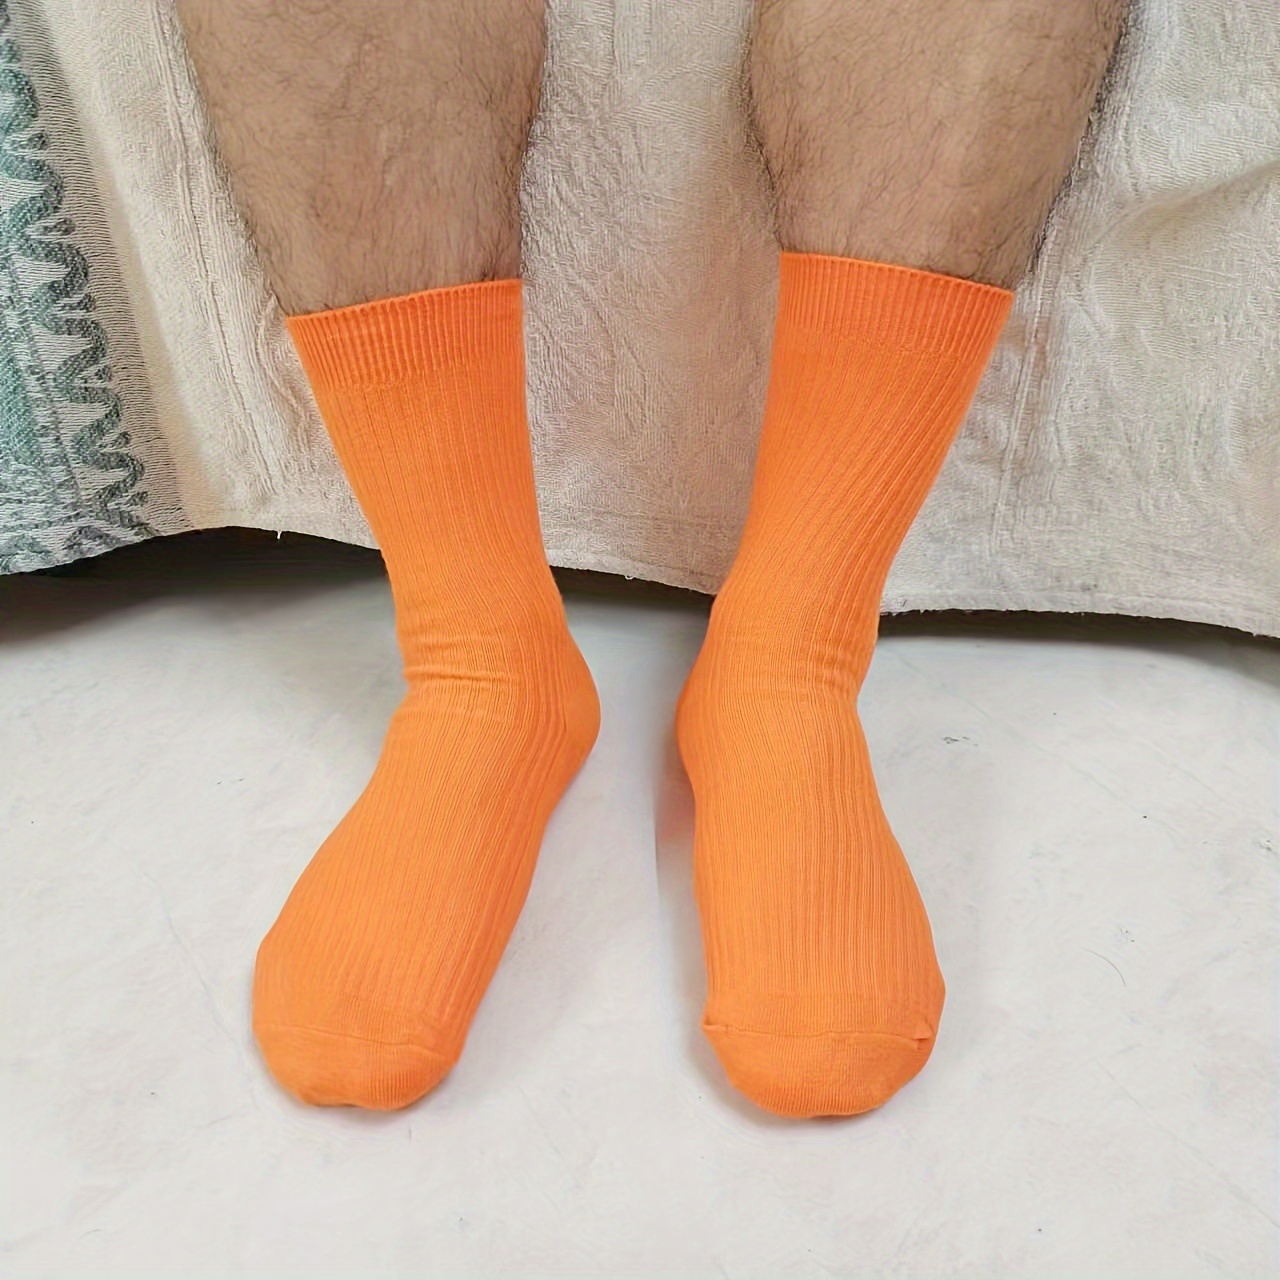 

1 Pair Of Men's Cotton Blend Bright Color Fashion Crew Socks, Comfy & Breathable Elastic Sport Socks, For Daily Wearing